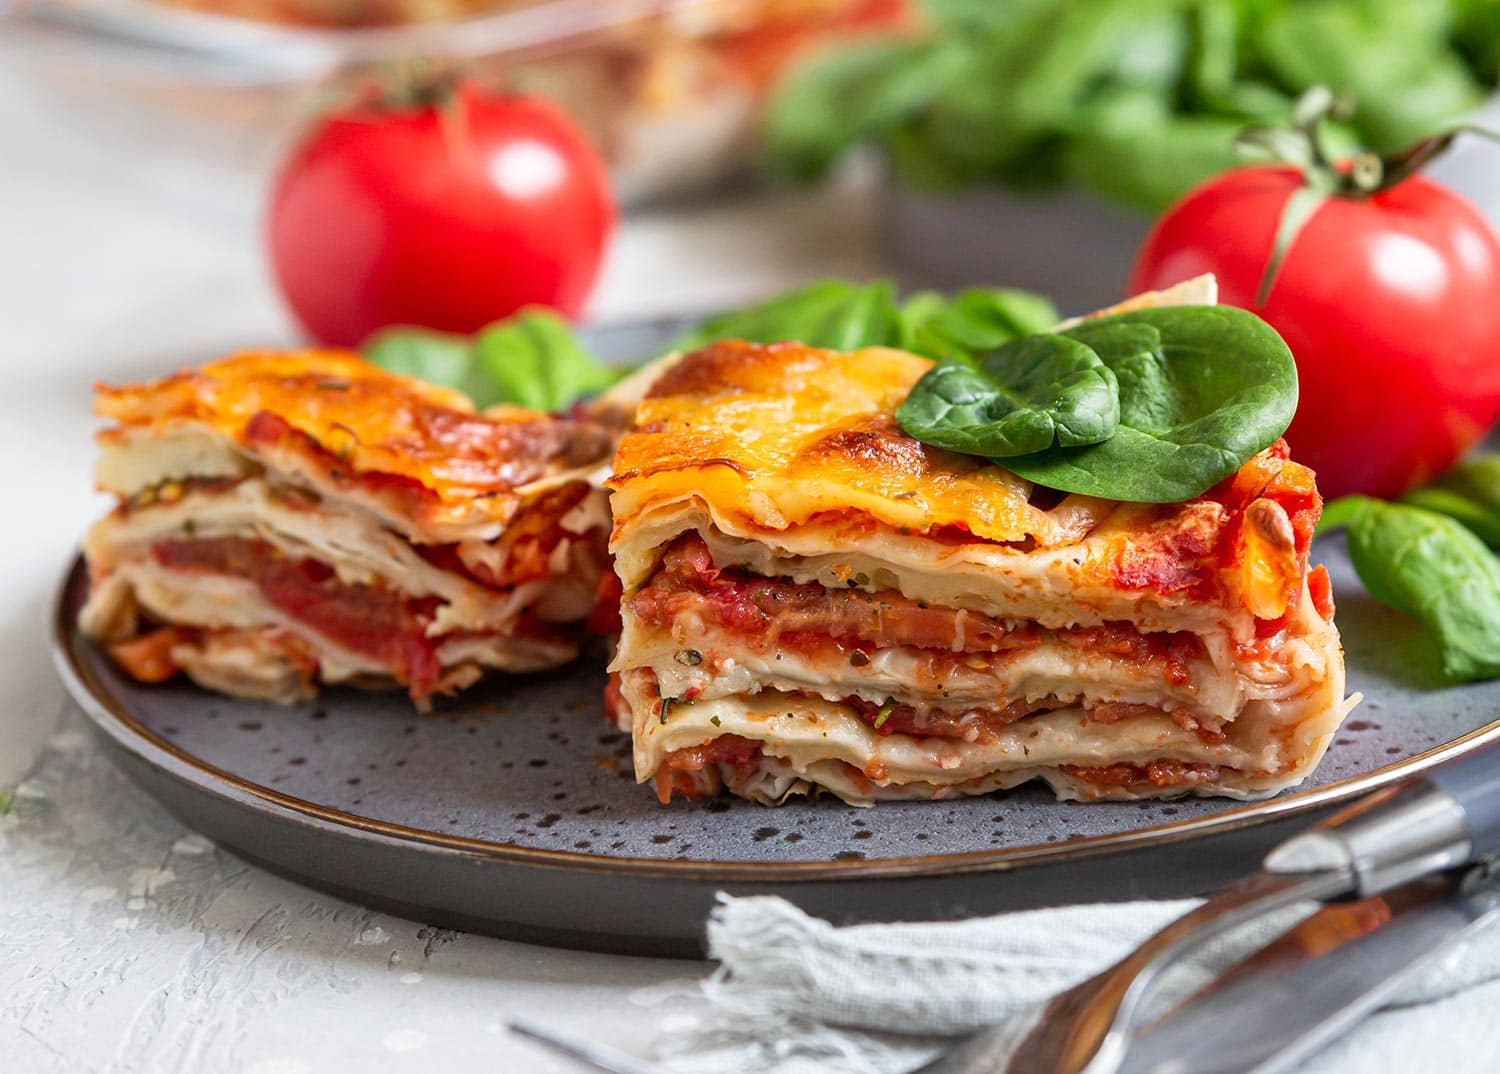 Italian lasagna with tomato sauce and cheese served with tomatoes and spinach